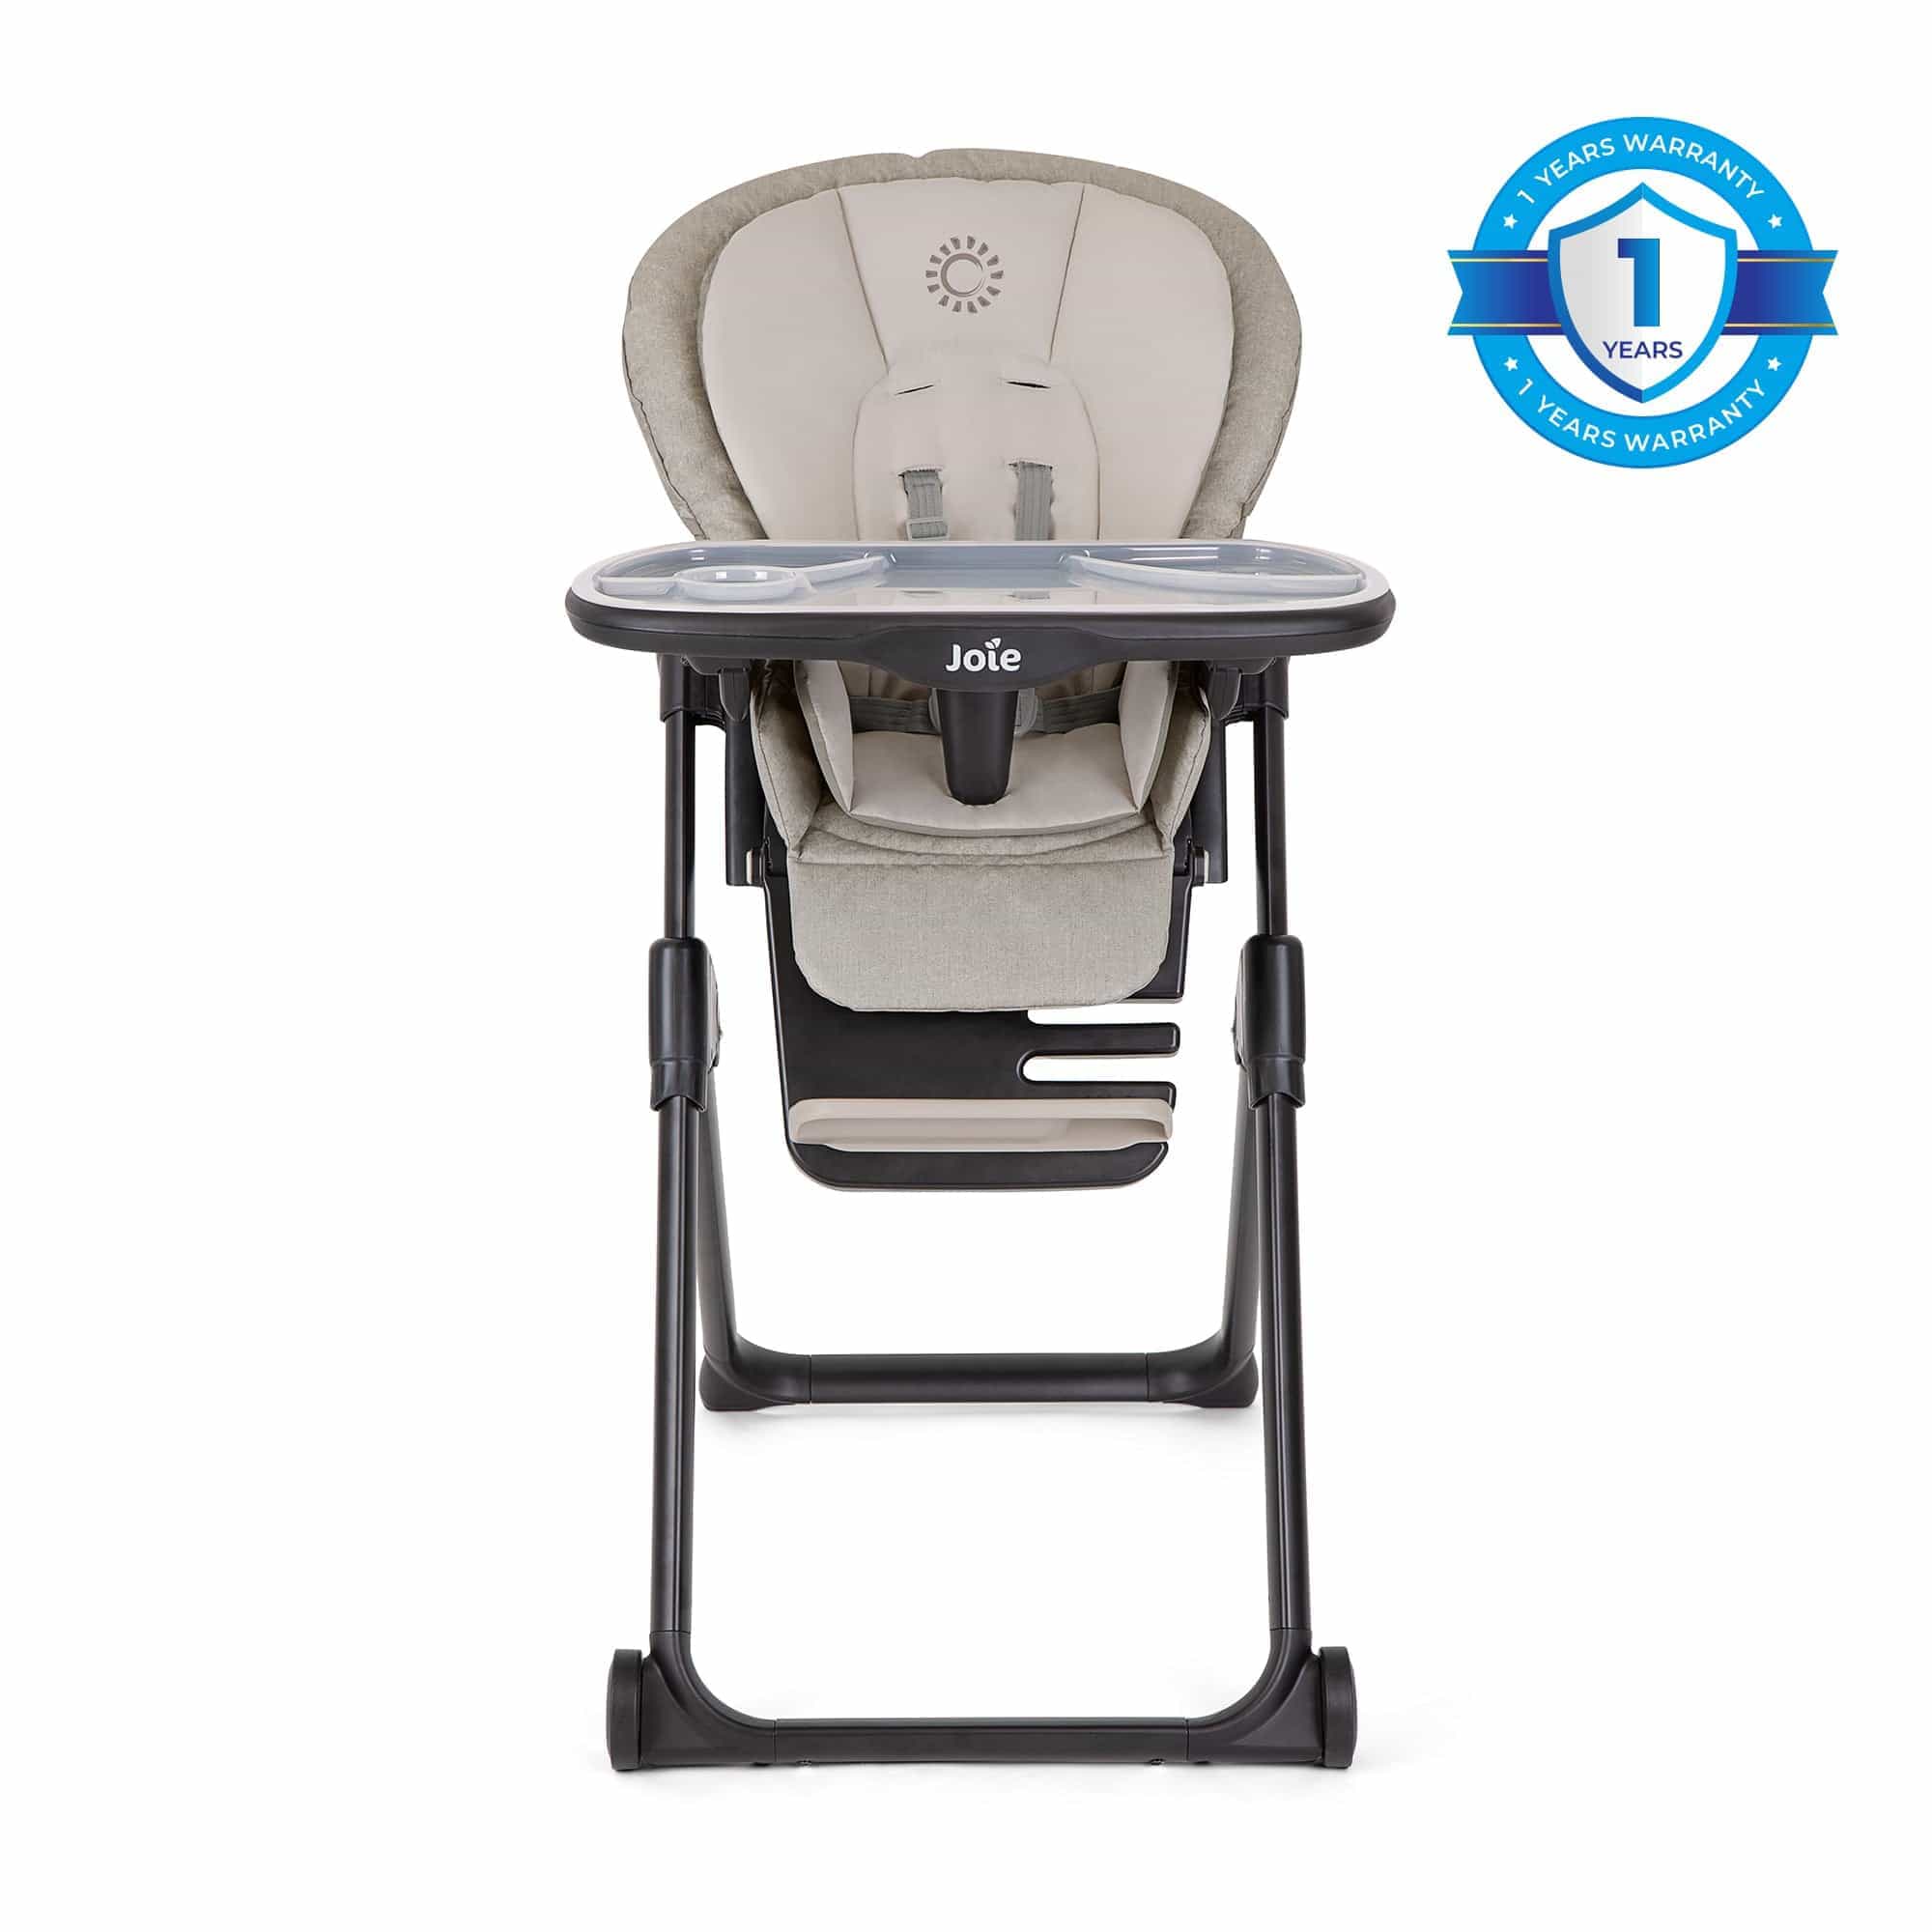 Joie Mimzy Recline Speckled High Chair || Birth+ to 15kgs - Toys4All.in